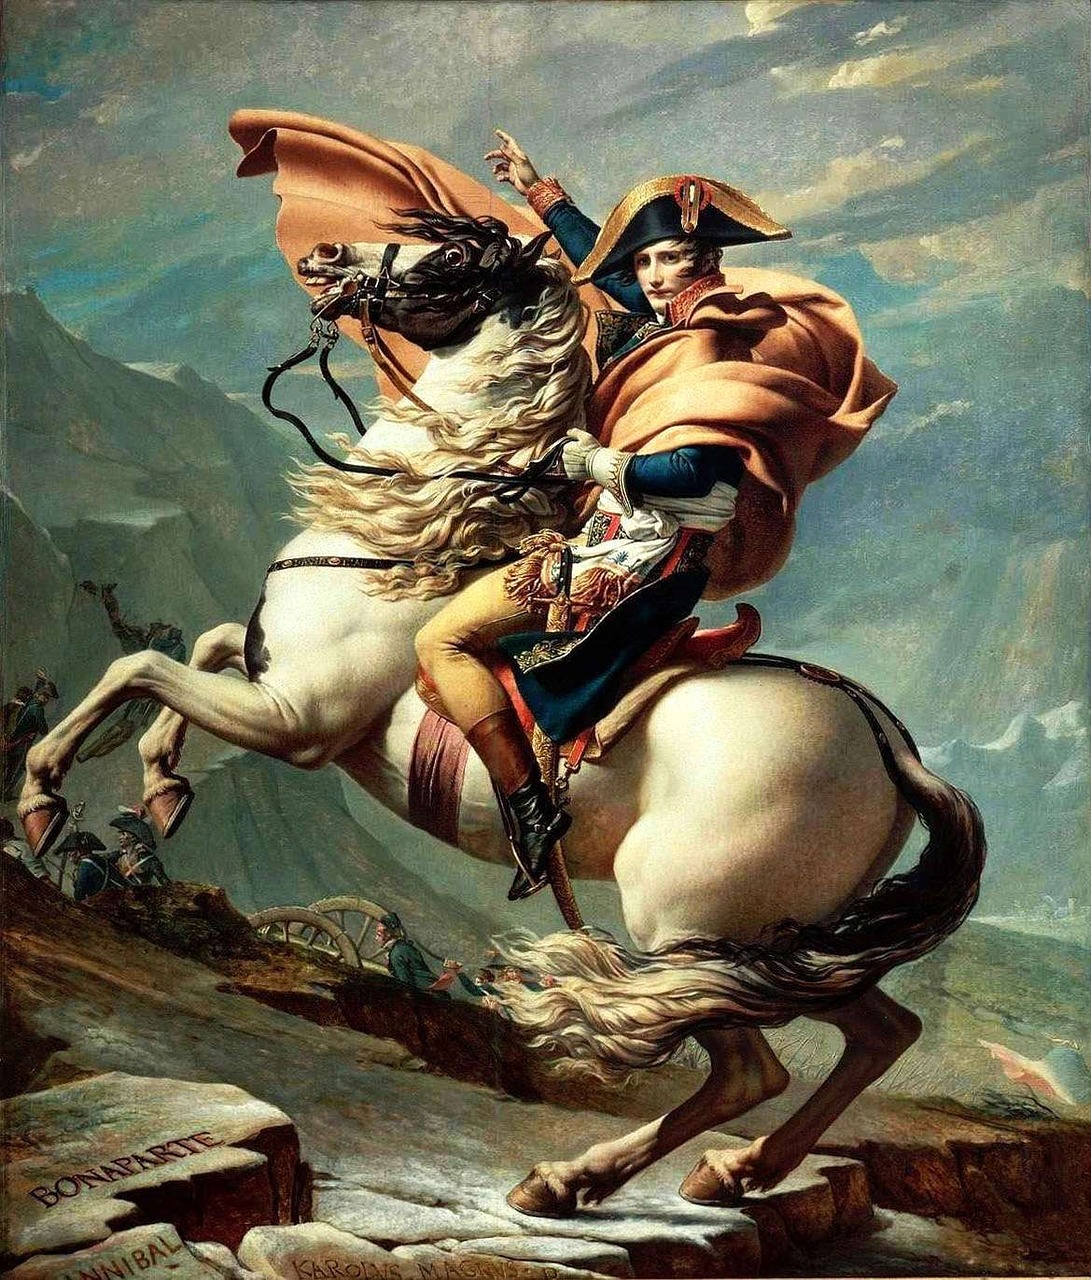 a painting of a man riding on the back of a horse, instagram, neoclassicism, napoleon crossing the alps, clasps his bangs in one hand, doing a hot majestic pose, revolution